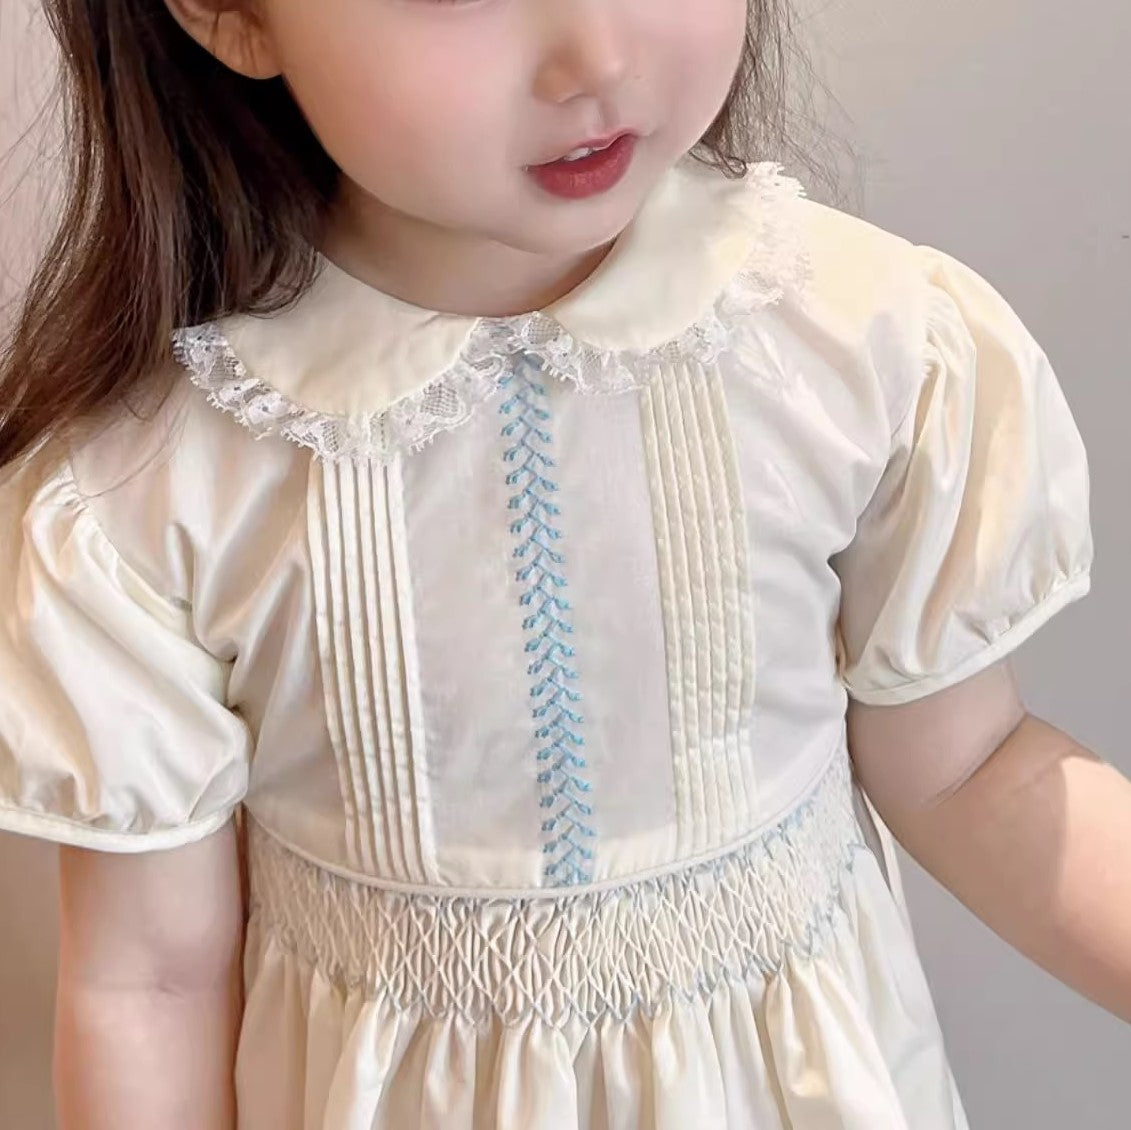 Beige Hand Smocked & Embroidered Dress,2T to 7T.